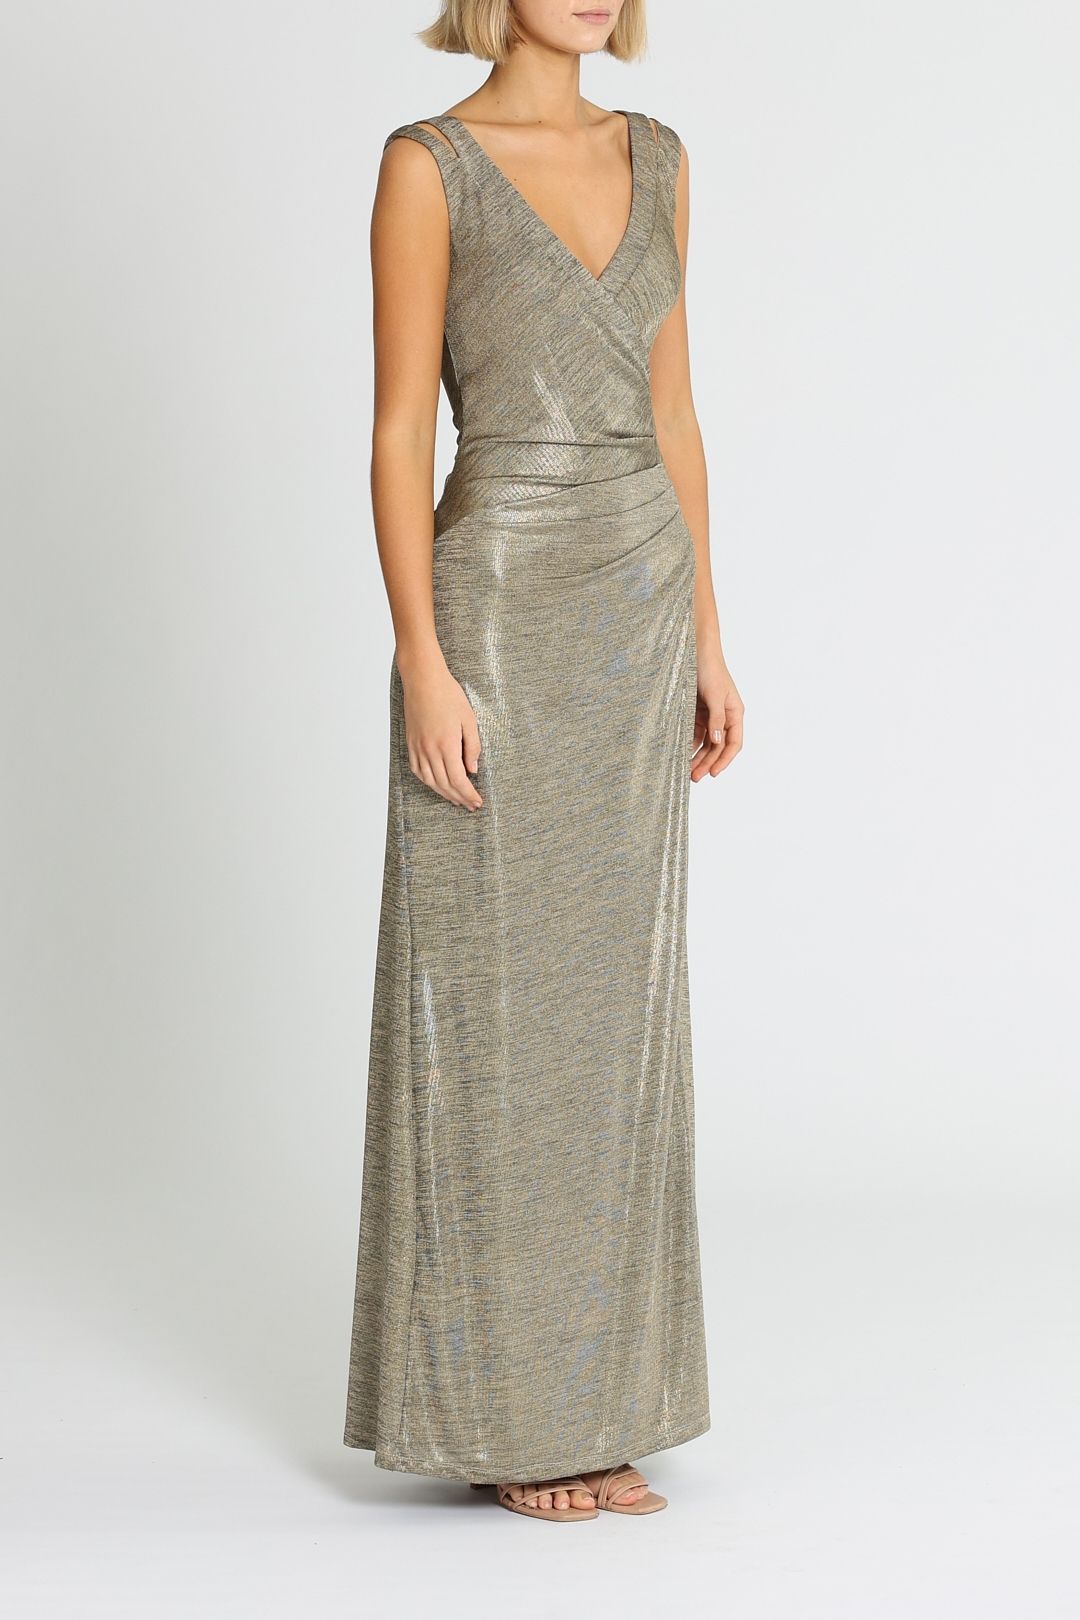 Montique Milani Metallic Gown Ruched